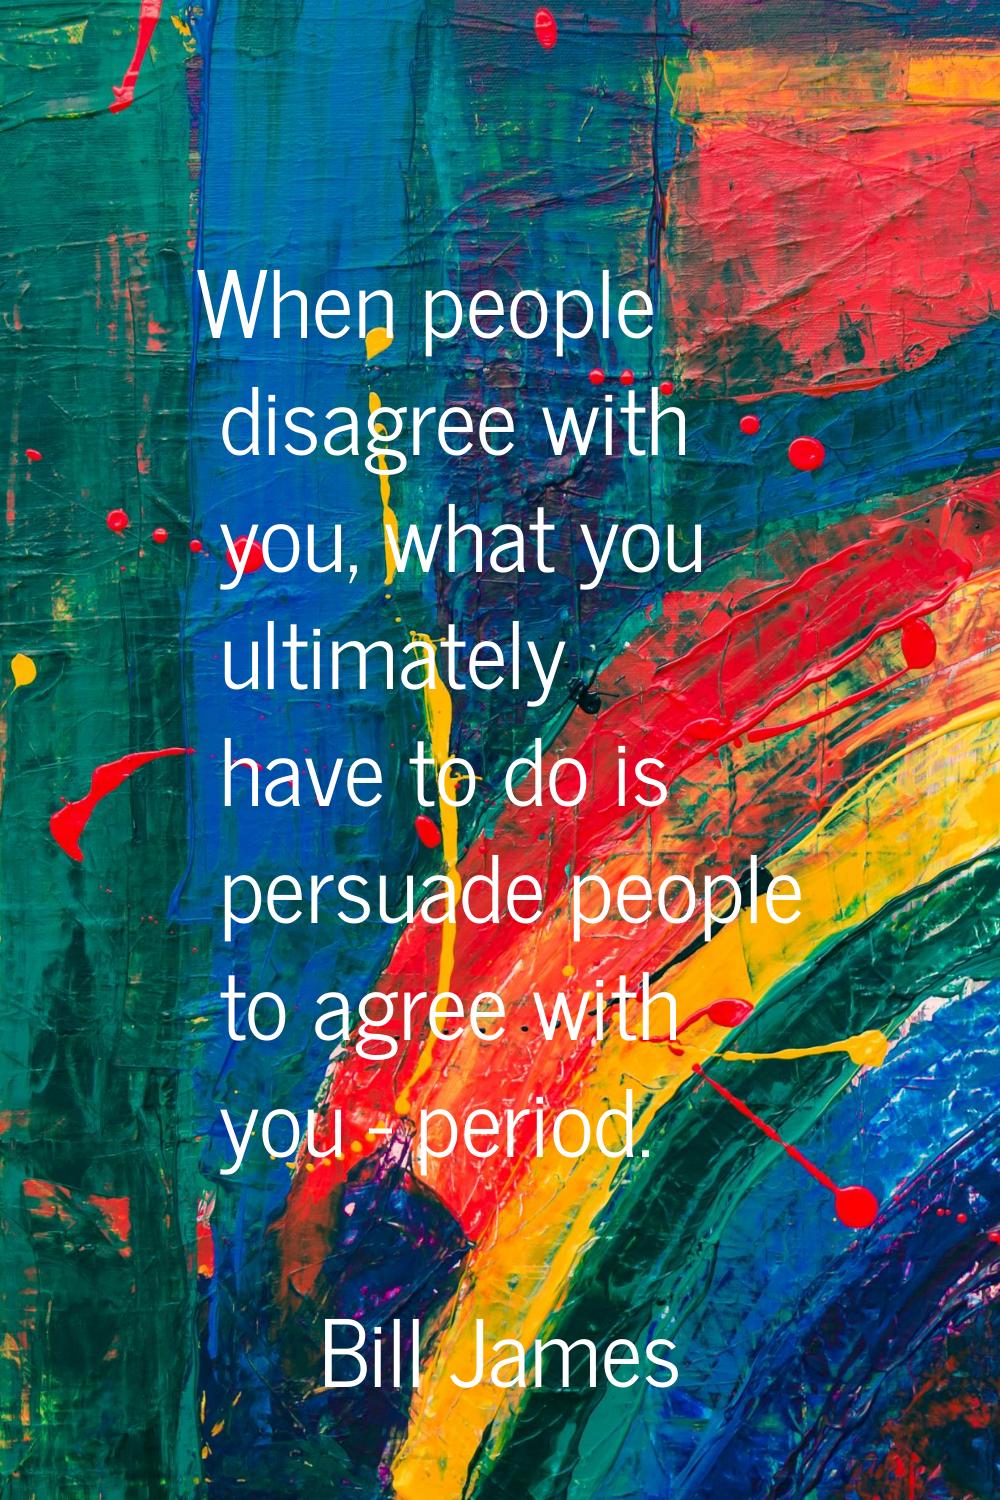 When people disagree with you, what you ultimately have to do is persuade people to agree with you 